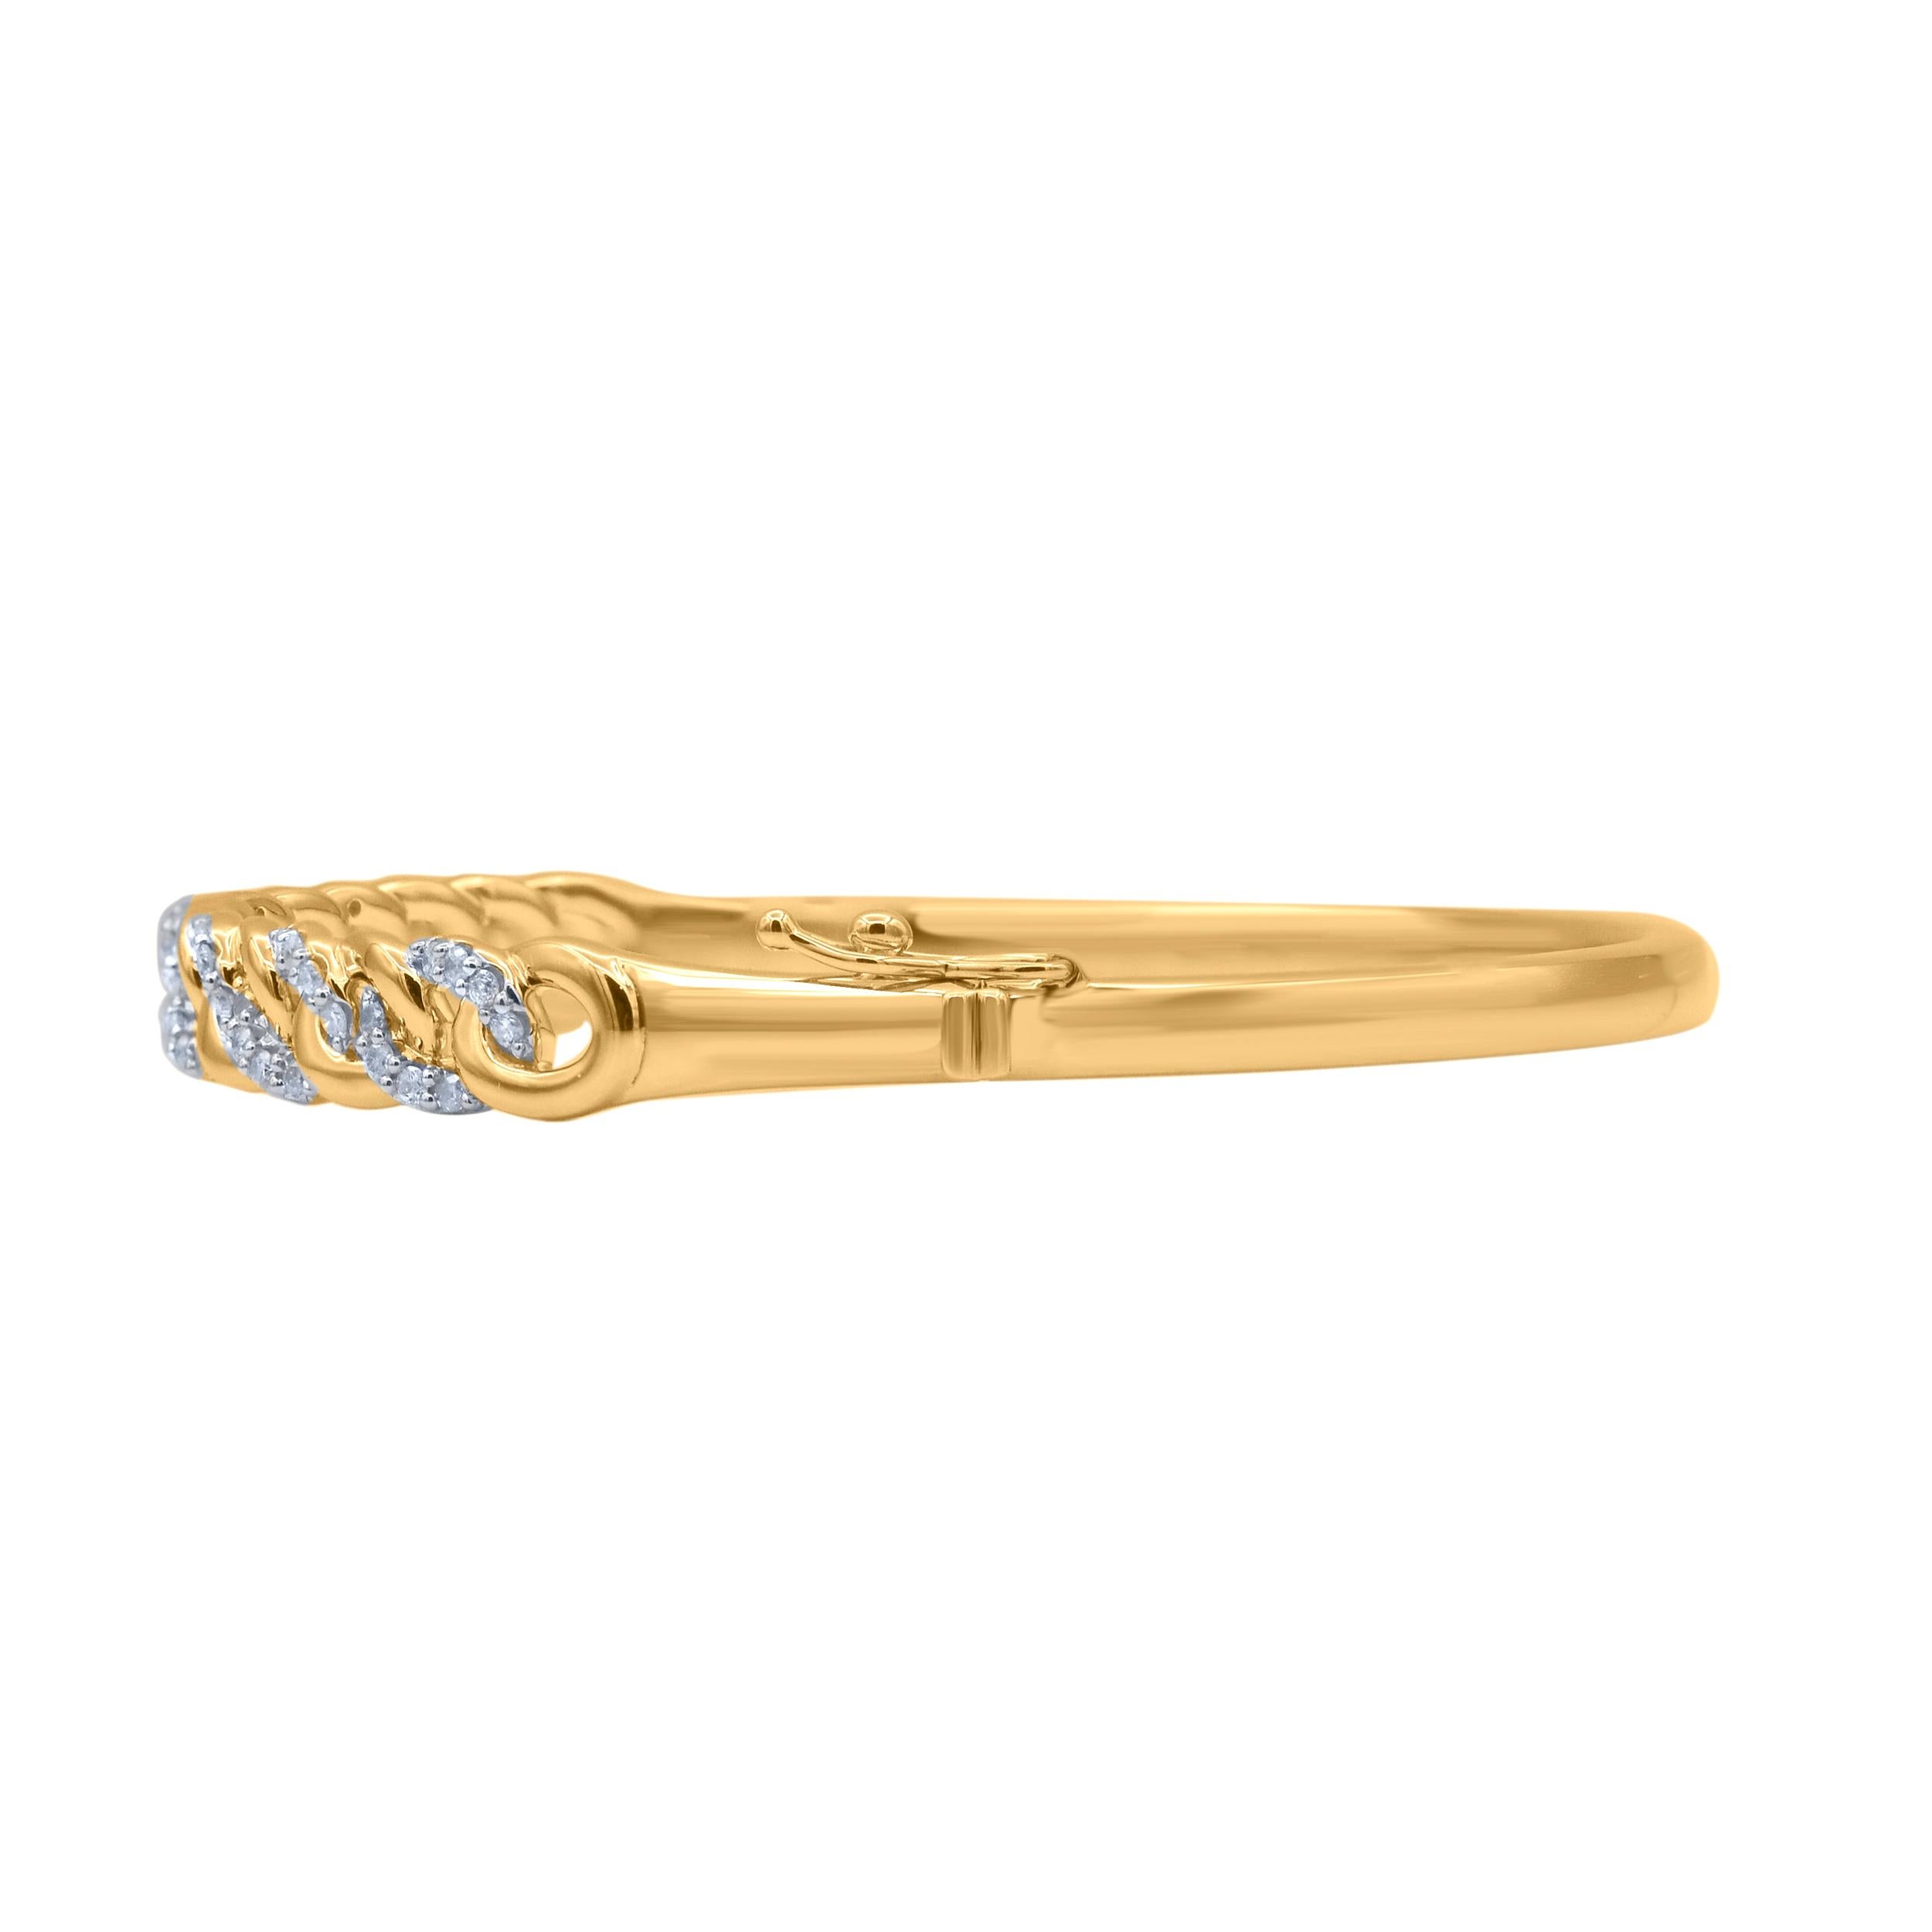 Turn heads with this eye-catching diamond bangle bracelet. This Interlink bangle bracelet features 56 natural round brilliant cut diamonds in prong setting and crafted in 18kt yellow gold. Diamonds are graded H-I color, I2 clarity. 
